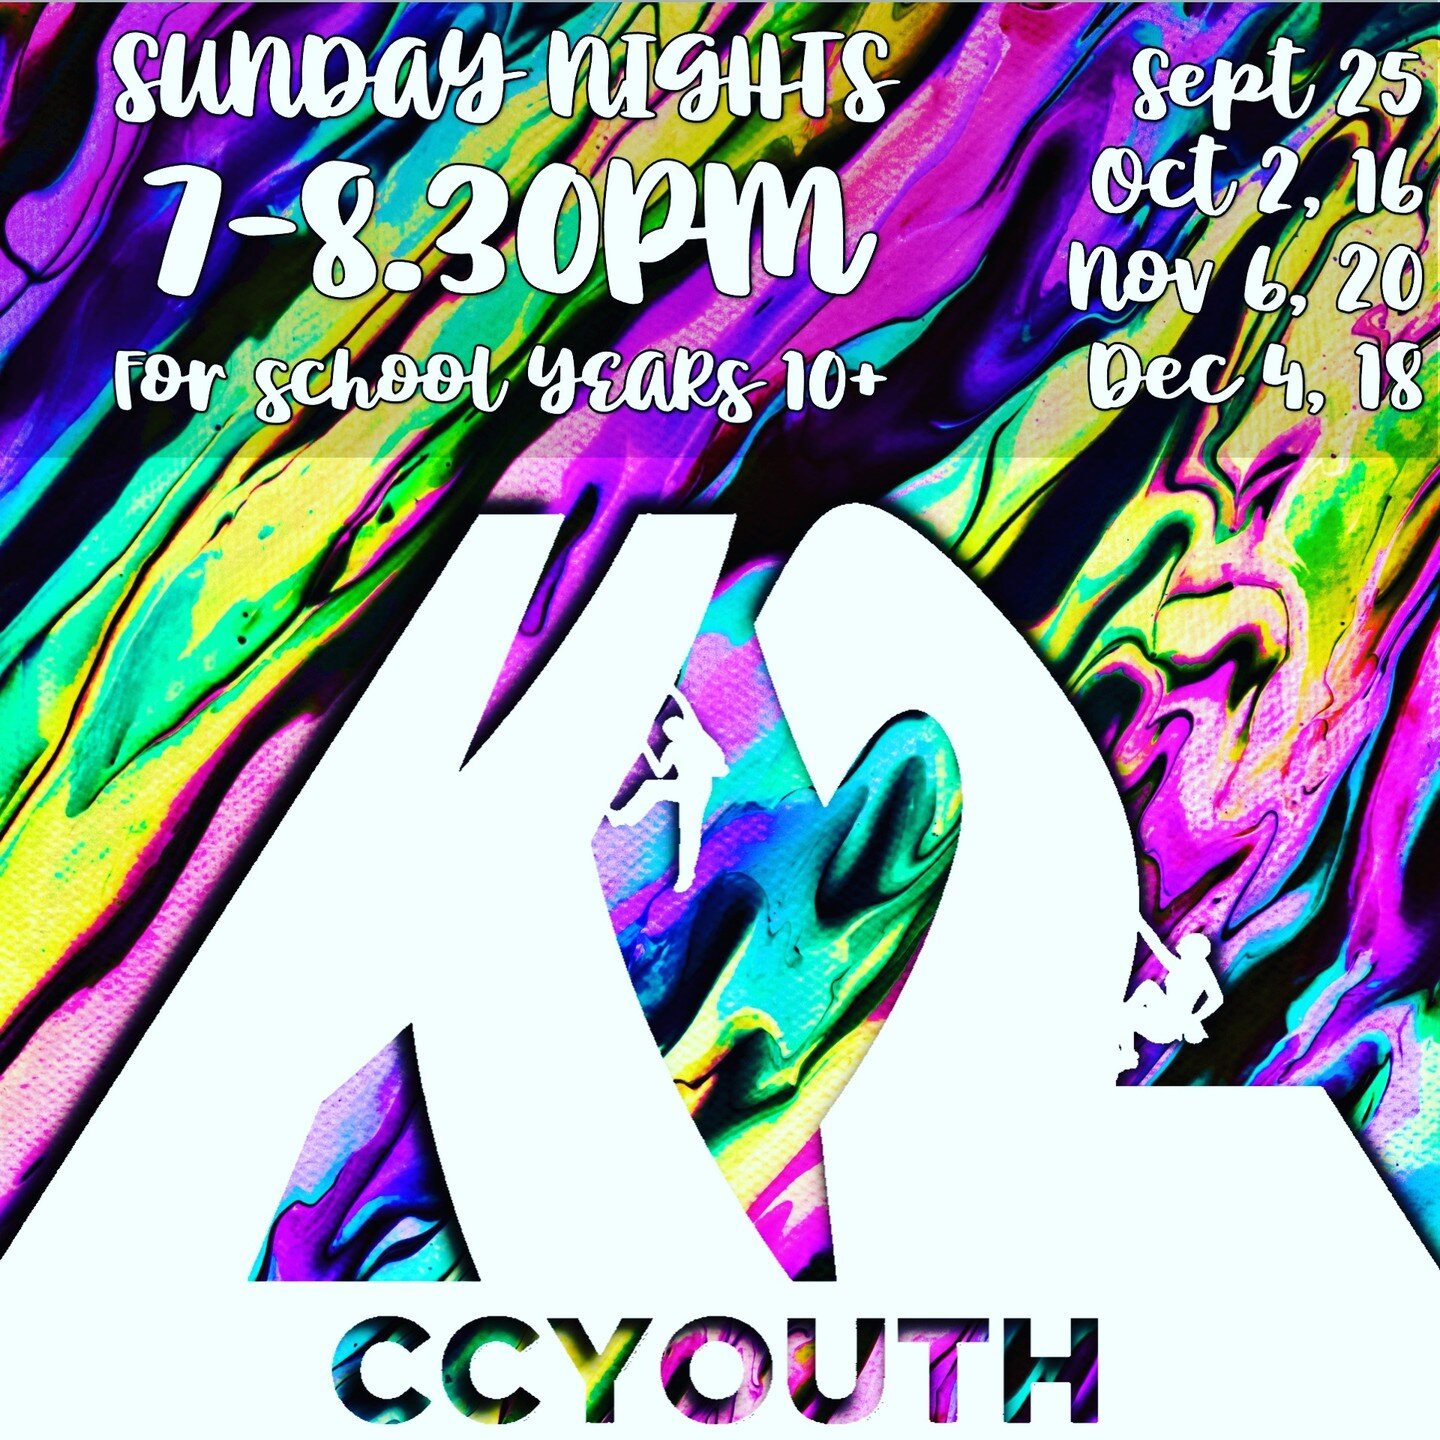 K2 is moving to Sunday nights this term... get the dates in your calendar now!